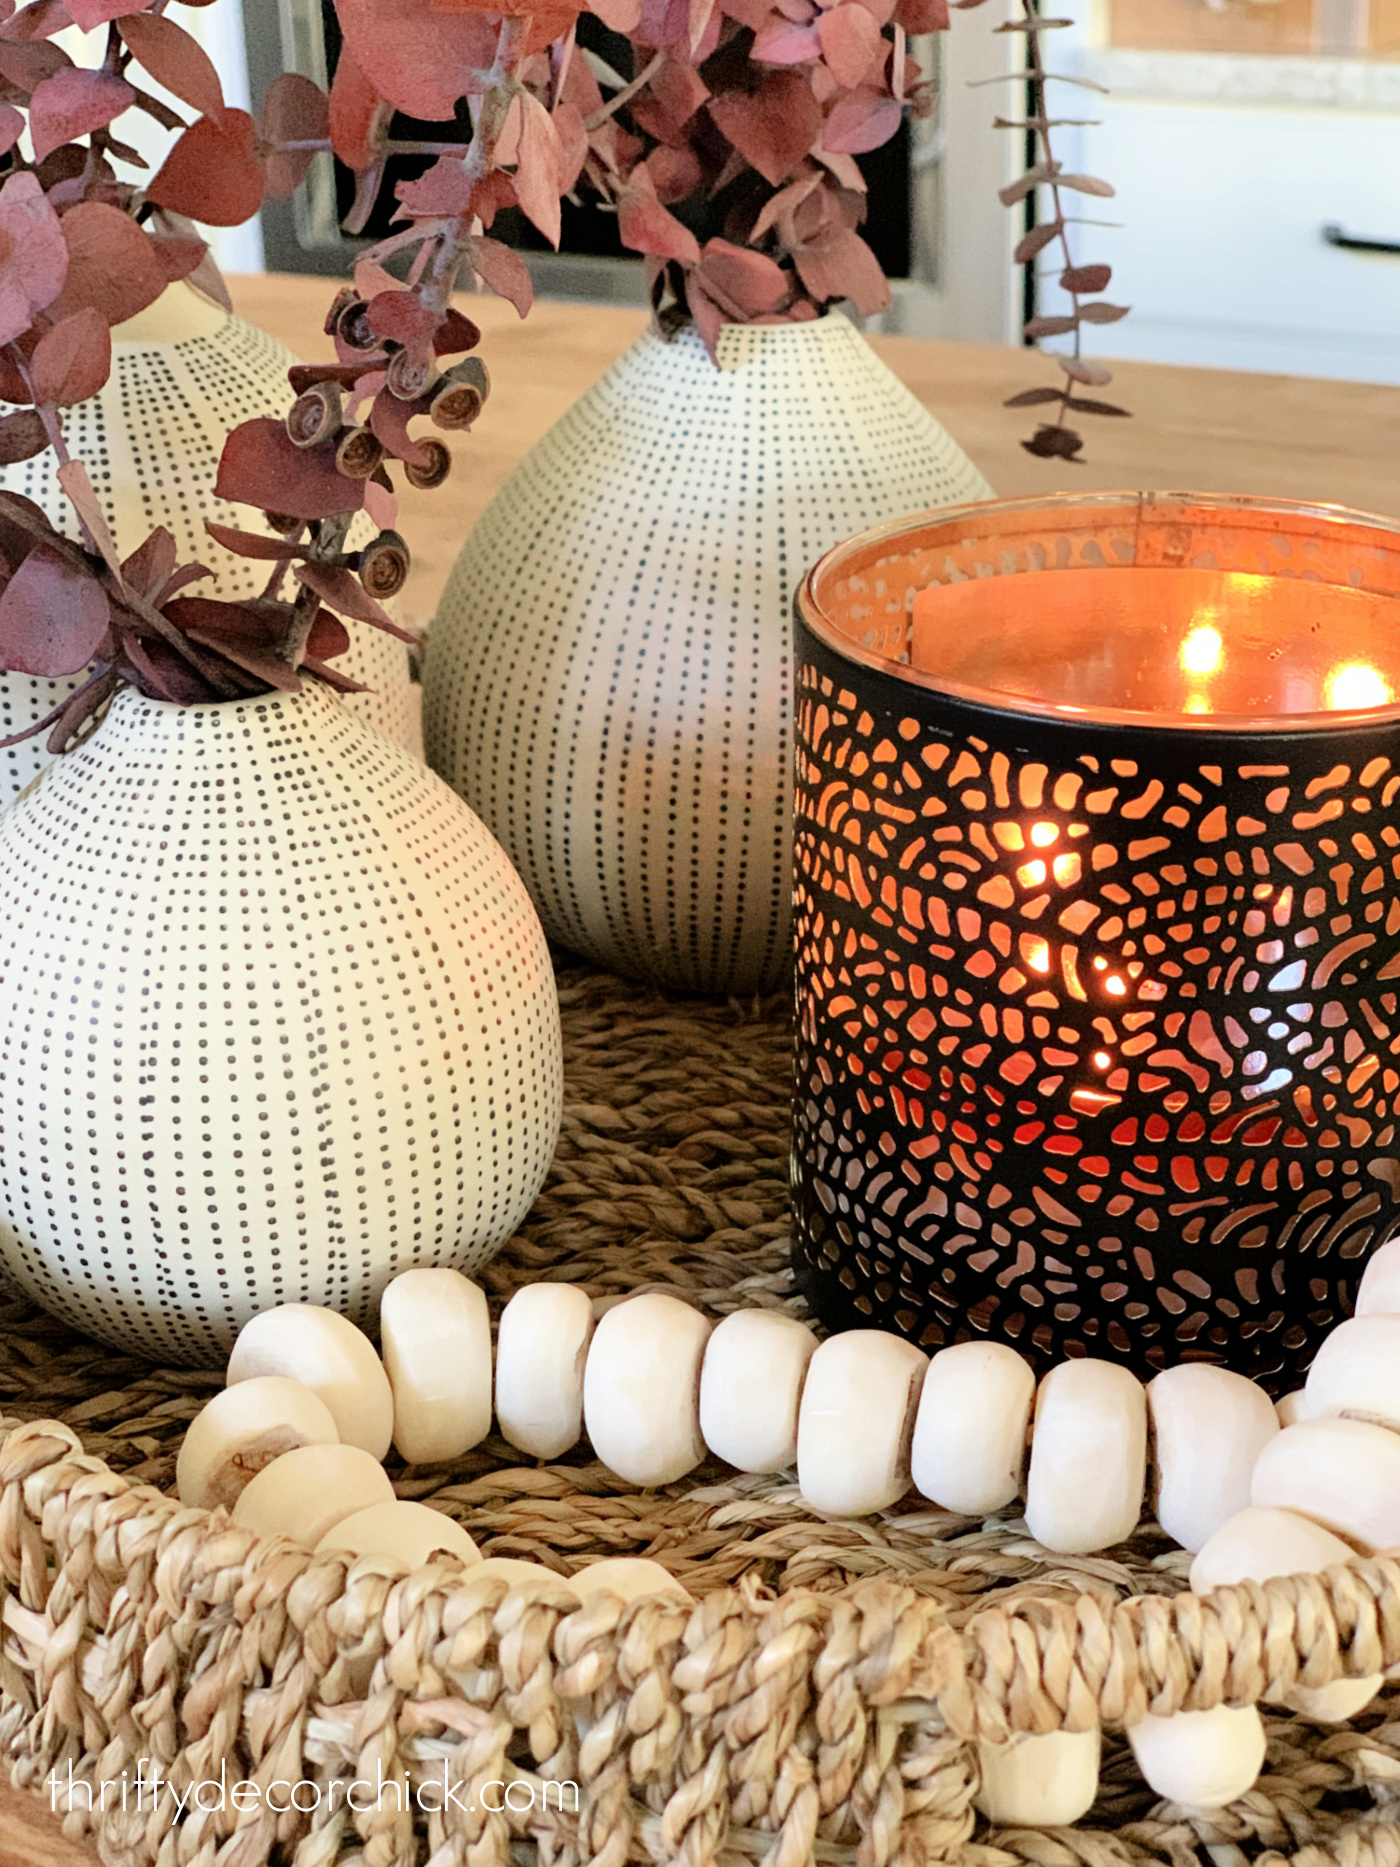 How to decorate for fall {without it screaming FALL} | Thrifty Decor Chick